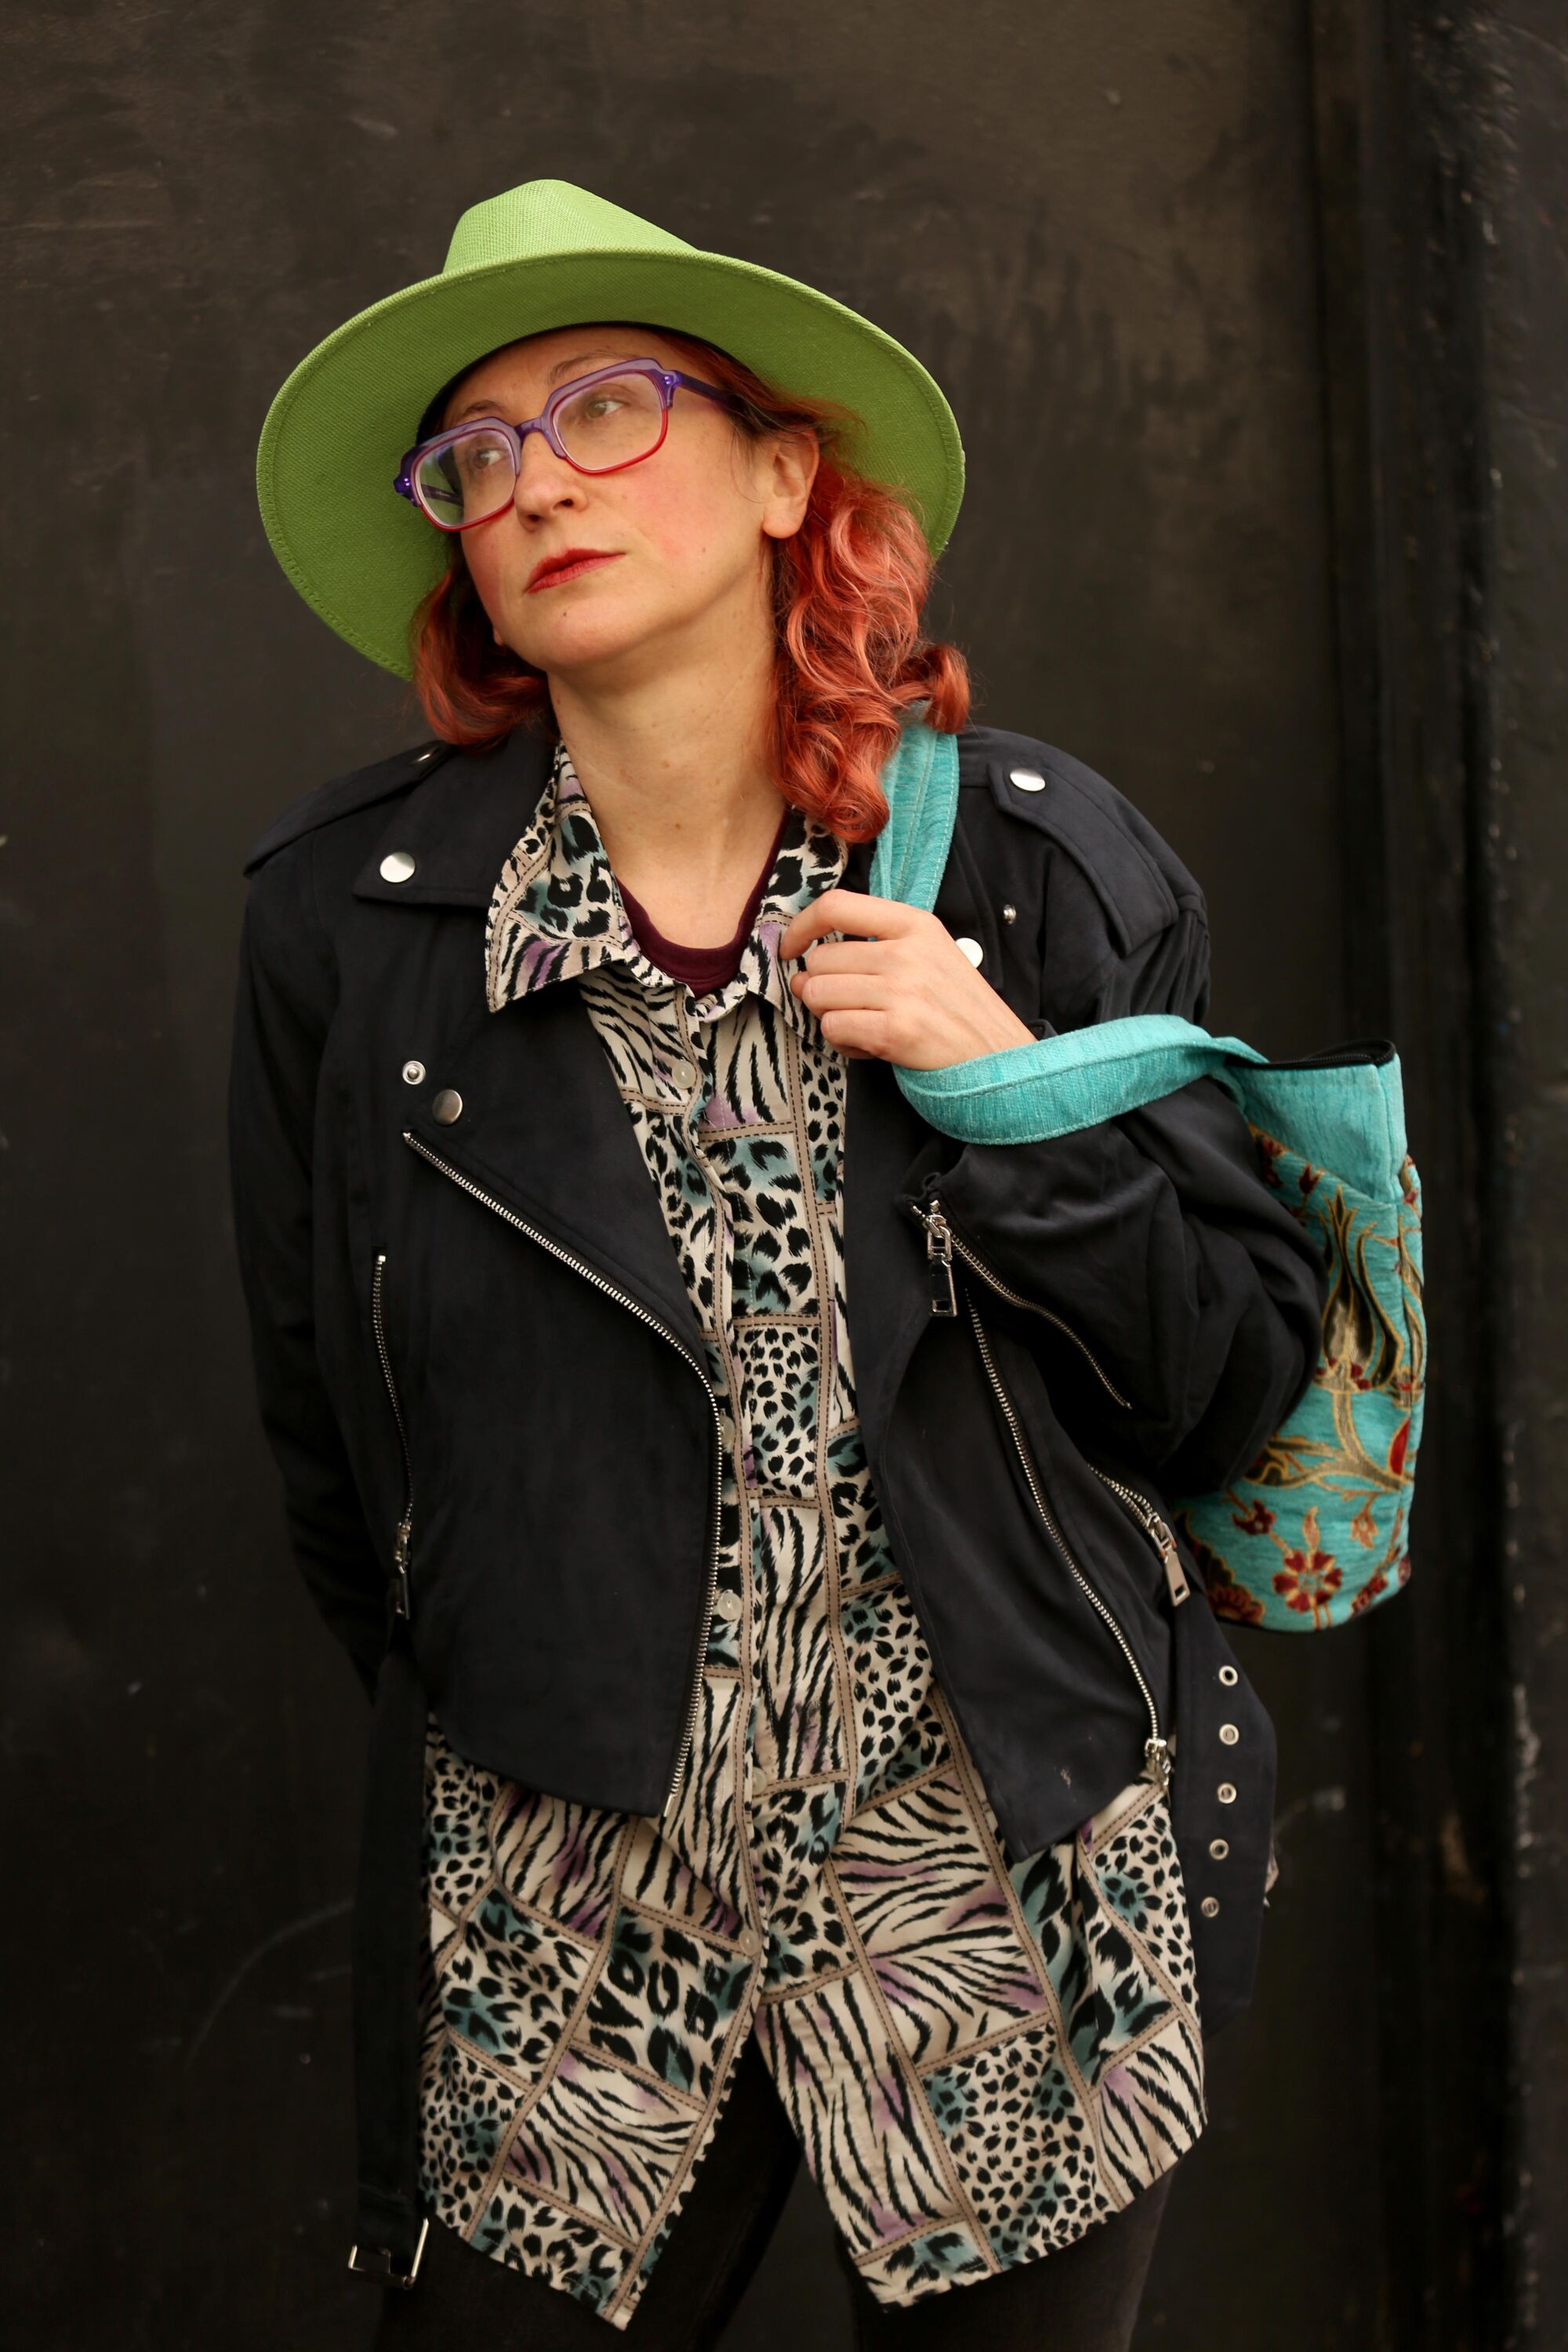 Rachel Mason in a black jacket, patterned shirt and green hat looks to the side while holding a colorful tote bag.